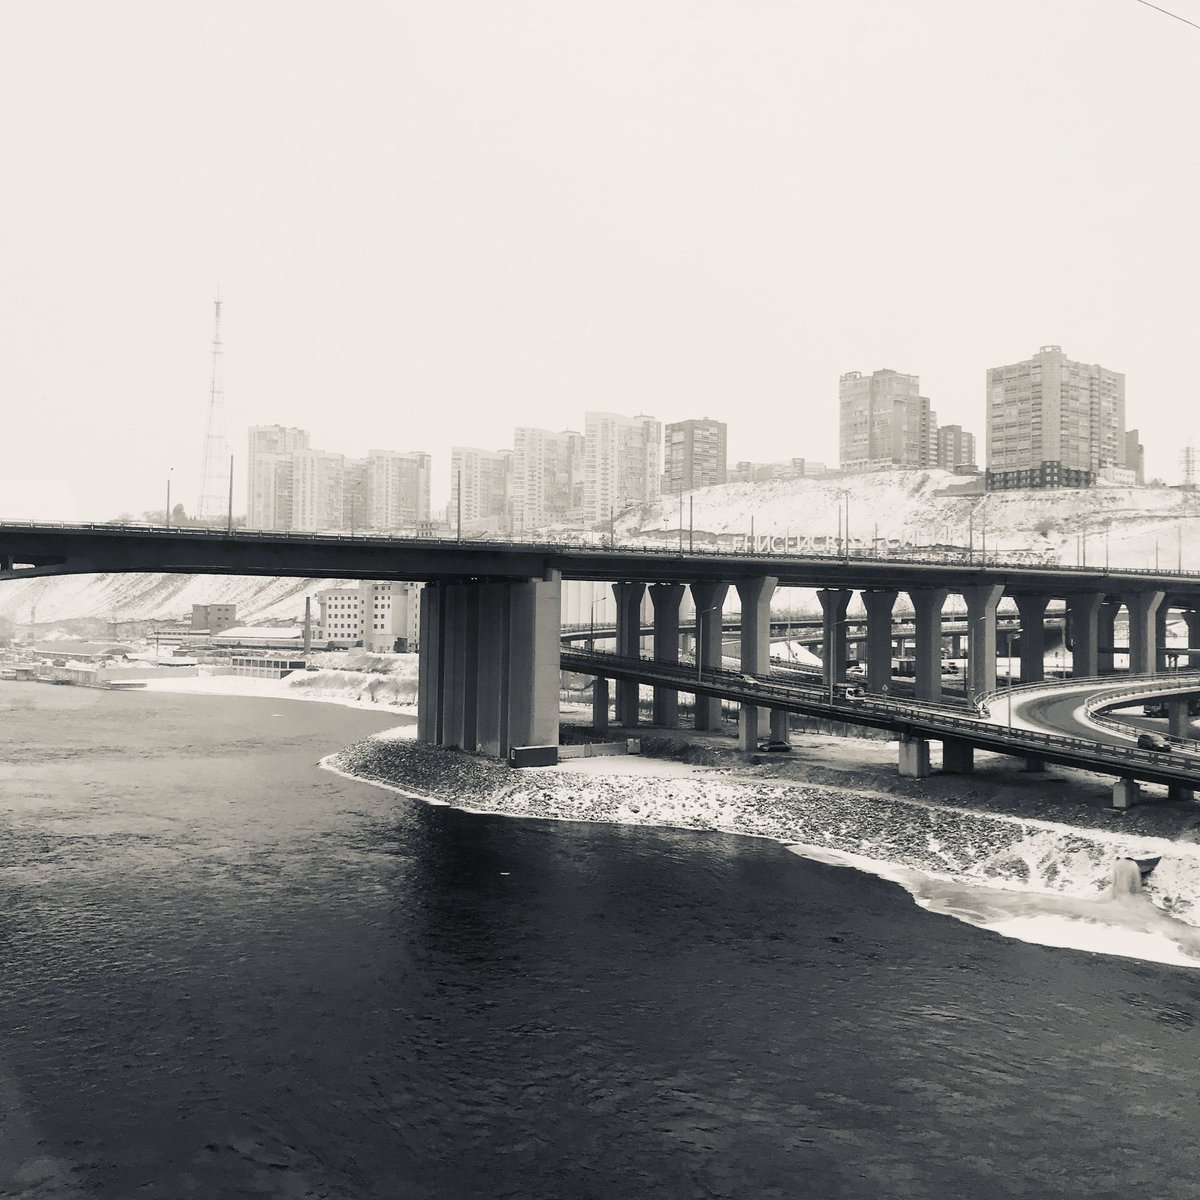 Impressions of Krasnoyarsk and the Yenisei River which is indeed not frozen! In black & white to match the mood and weather. Ahead is a very long stretch of towns I don’t know until we reach Irkutsk early tomorrow morning!